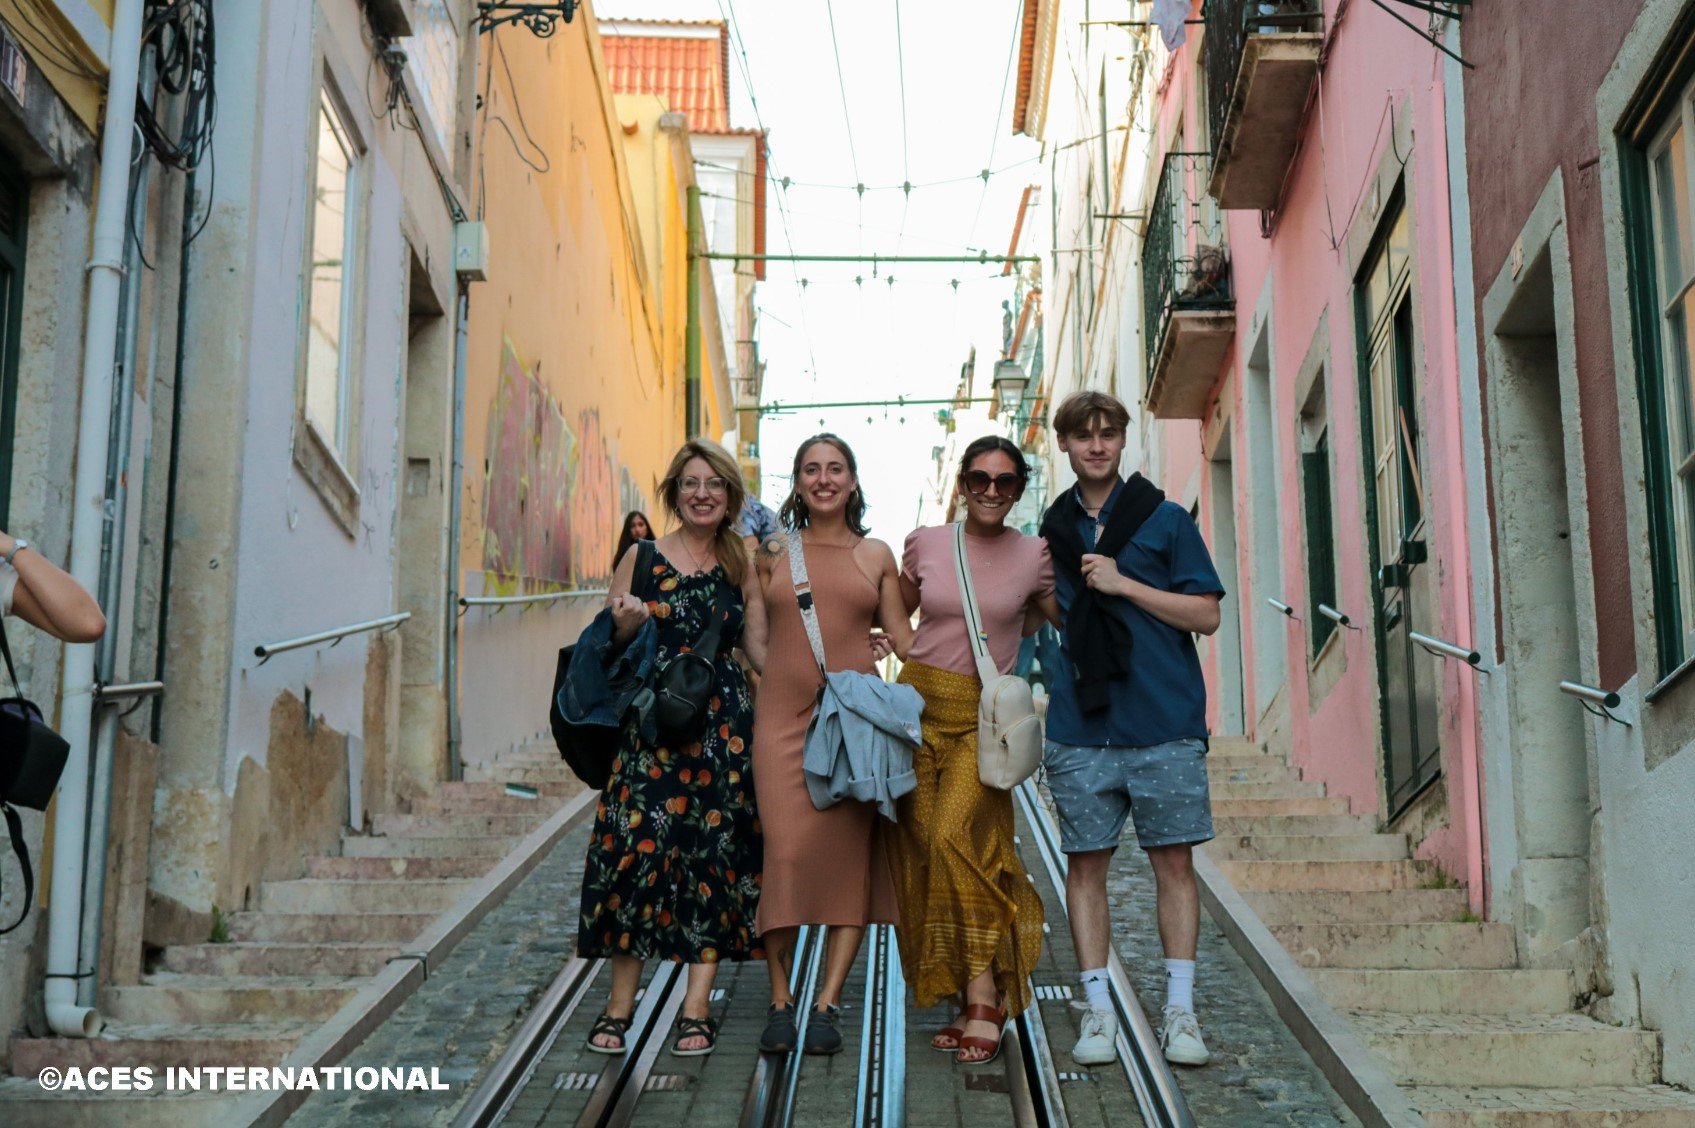 Four Educators Field Study group members take a picture in front of trolley train rails in Portugal.